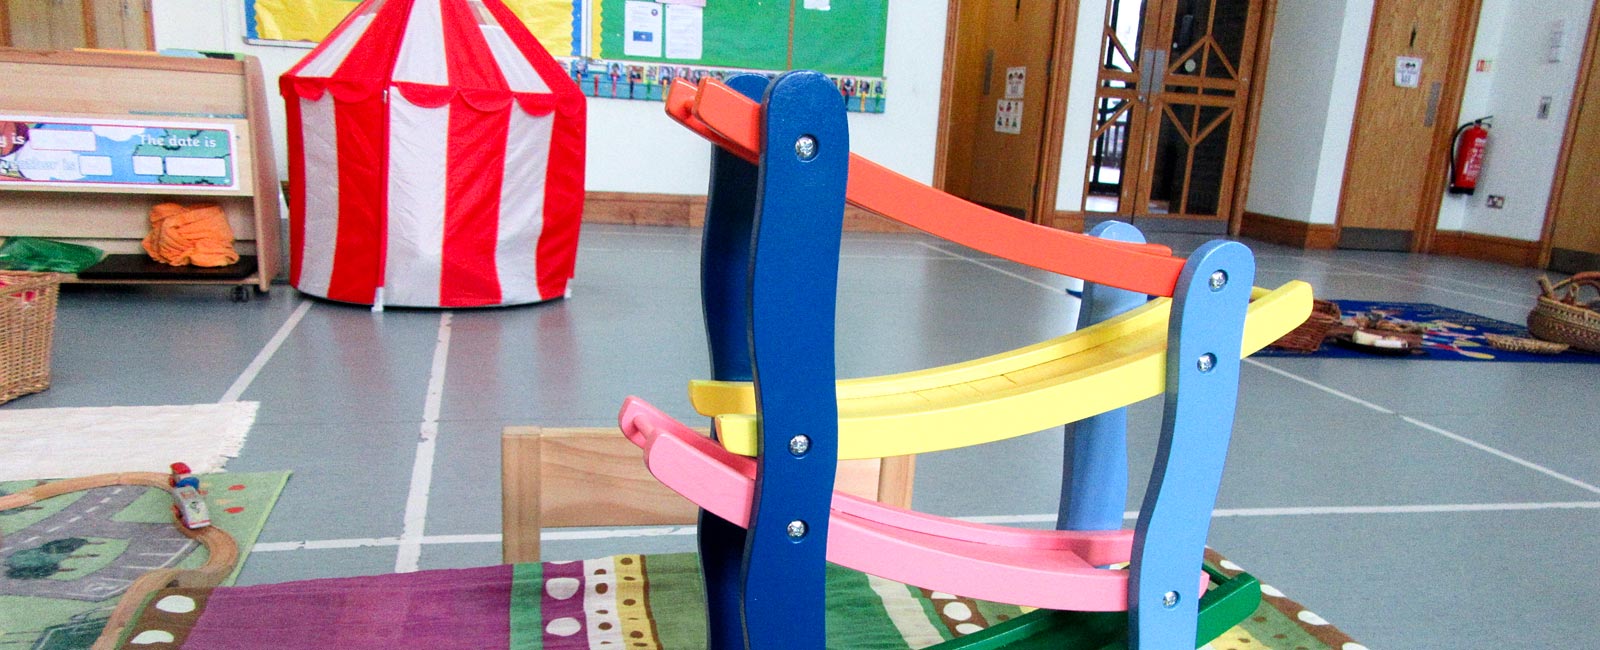 Kinder Preschools is based at Bromley Methodist Church, College Road, Bromley BR1 3NS.